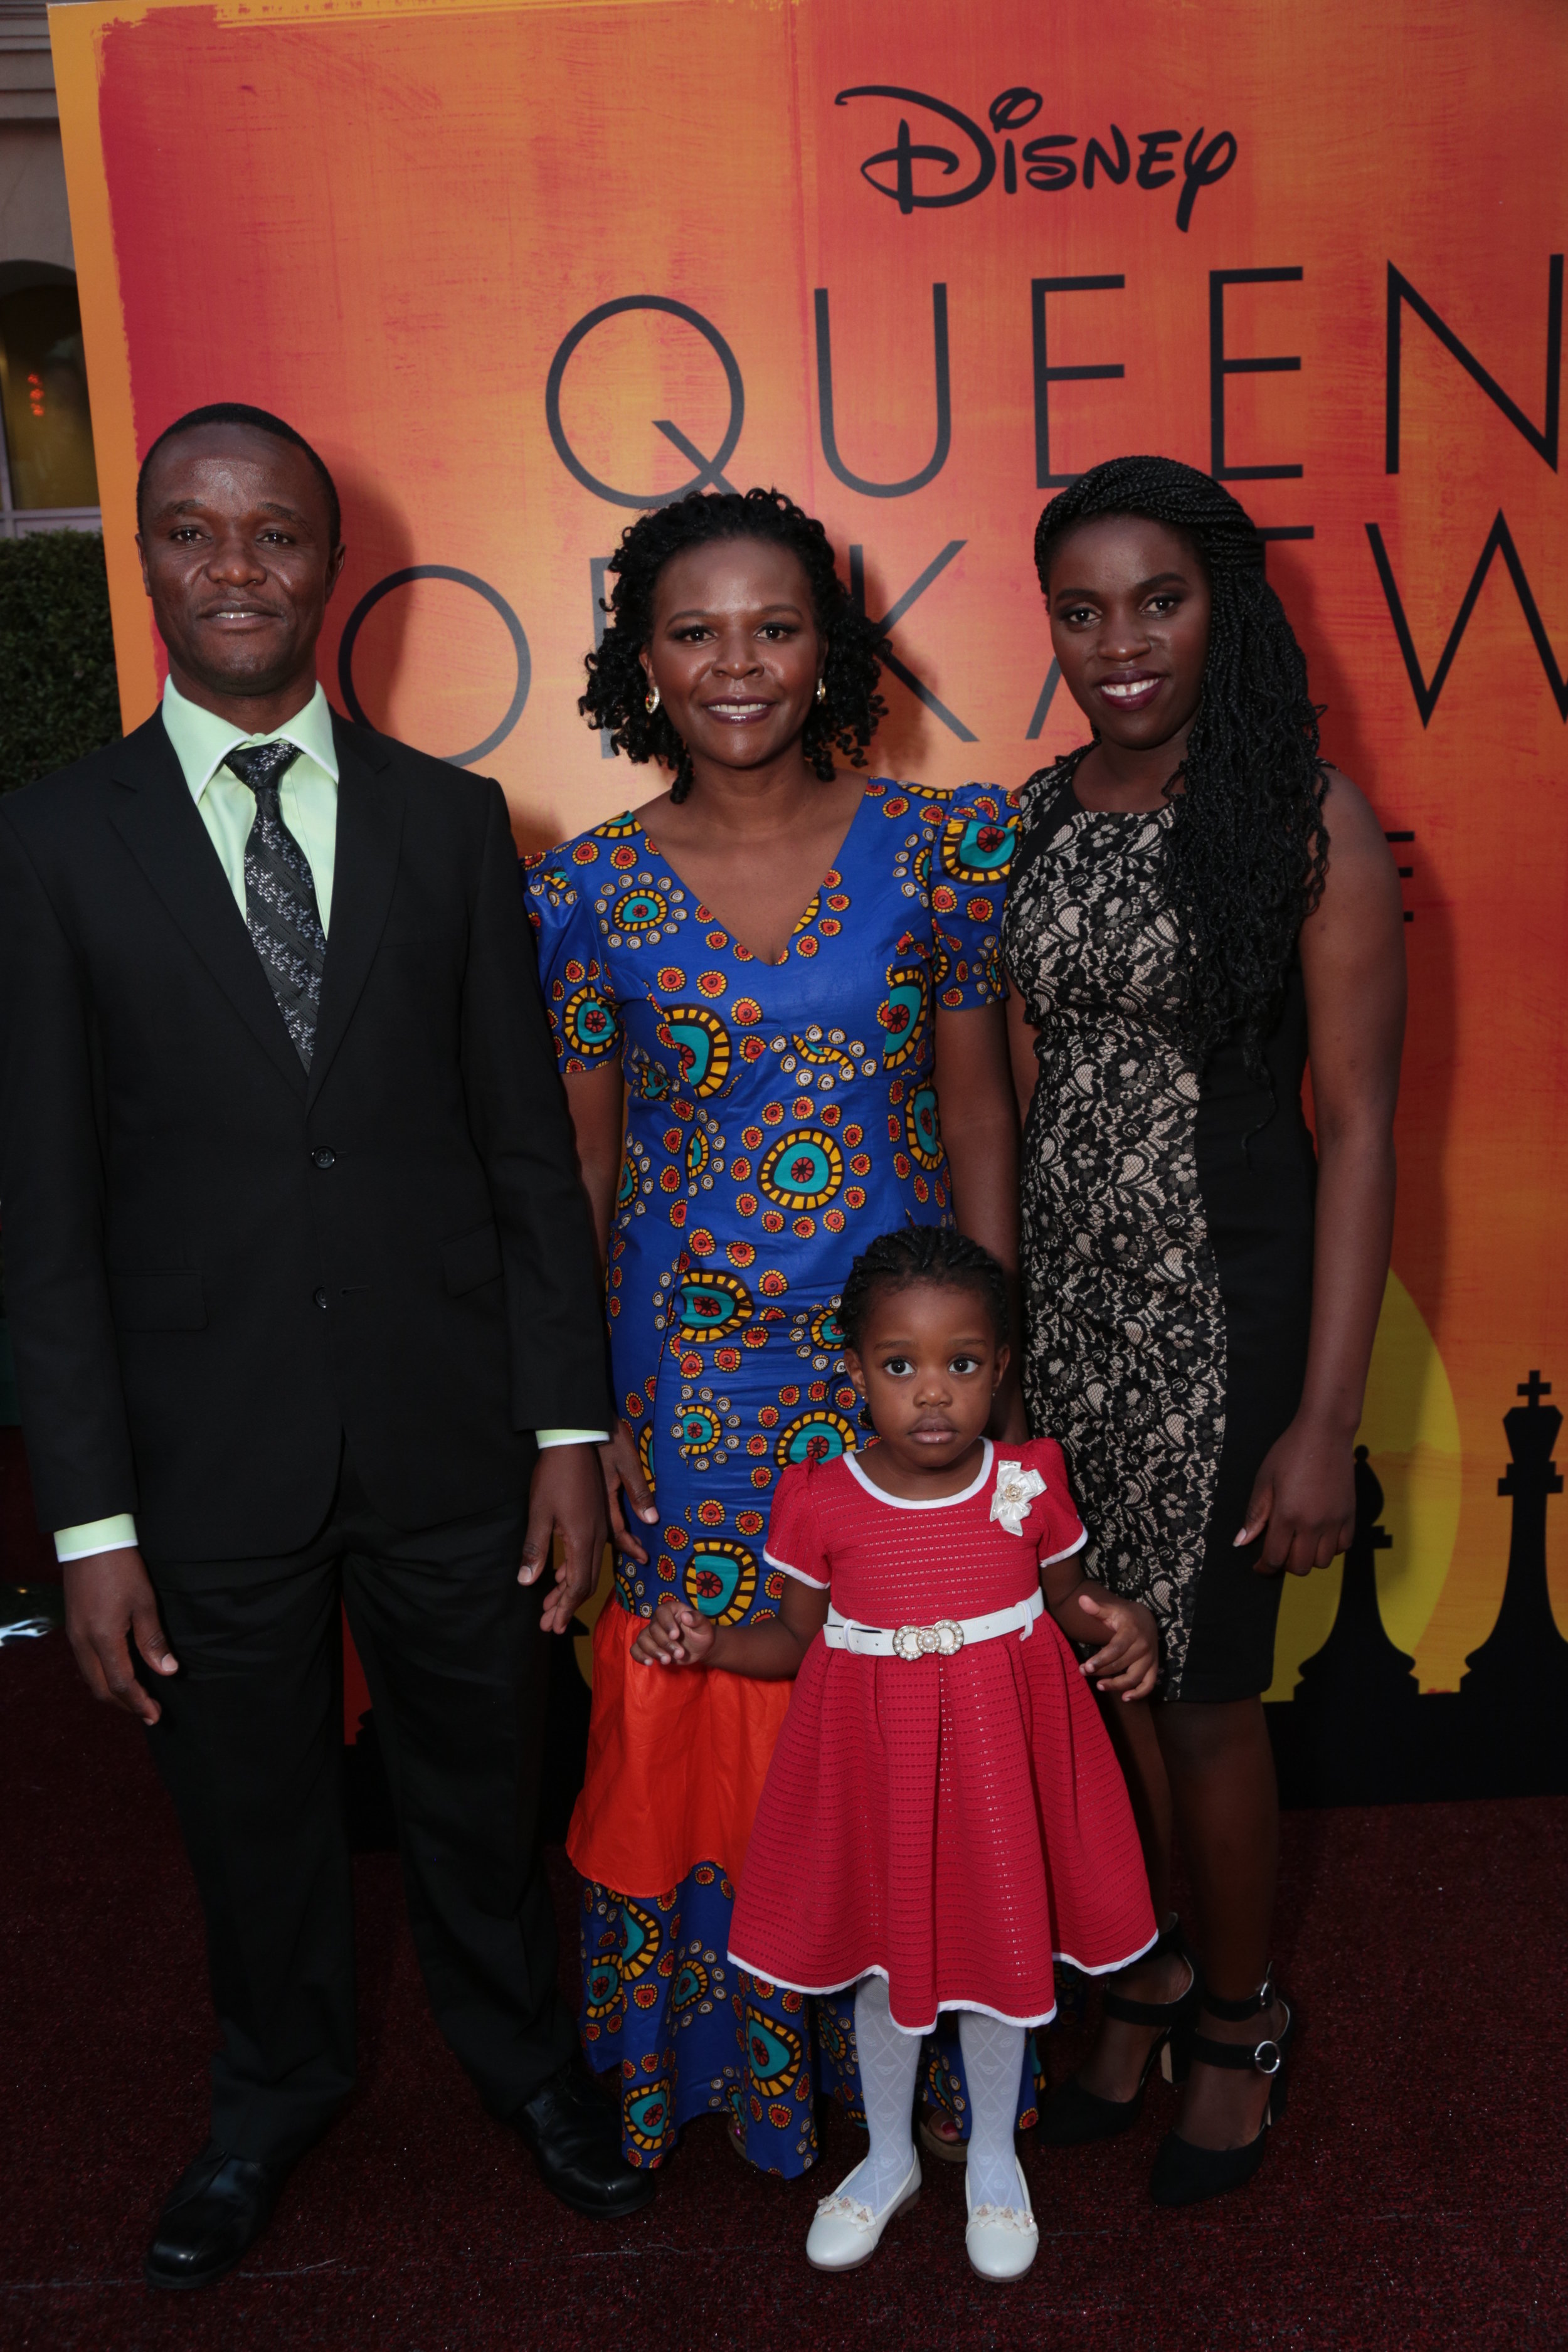 Robert Katende, Sara Katende, Phiona Mutesi and Hope Katende arrive at the U.S. premiere of Disney's Queen of Katwe at the El Capitan Theatre in Hollywood, CA on Tuesday, September 20, 2016. (Photo: Alex J. Berliner/ABImages)